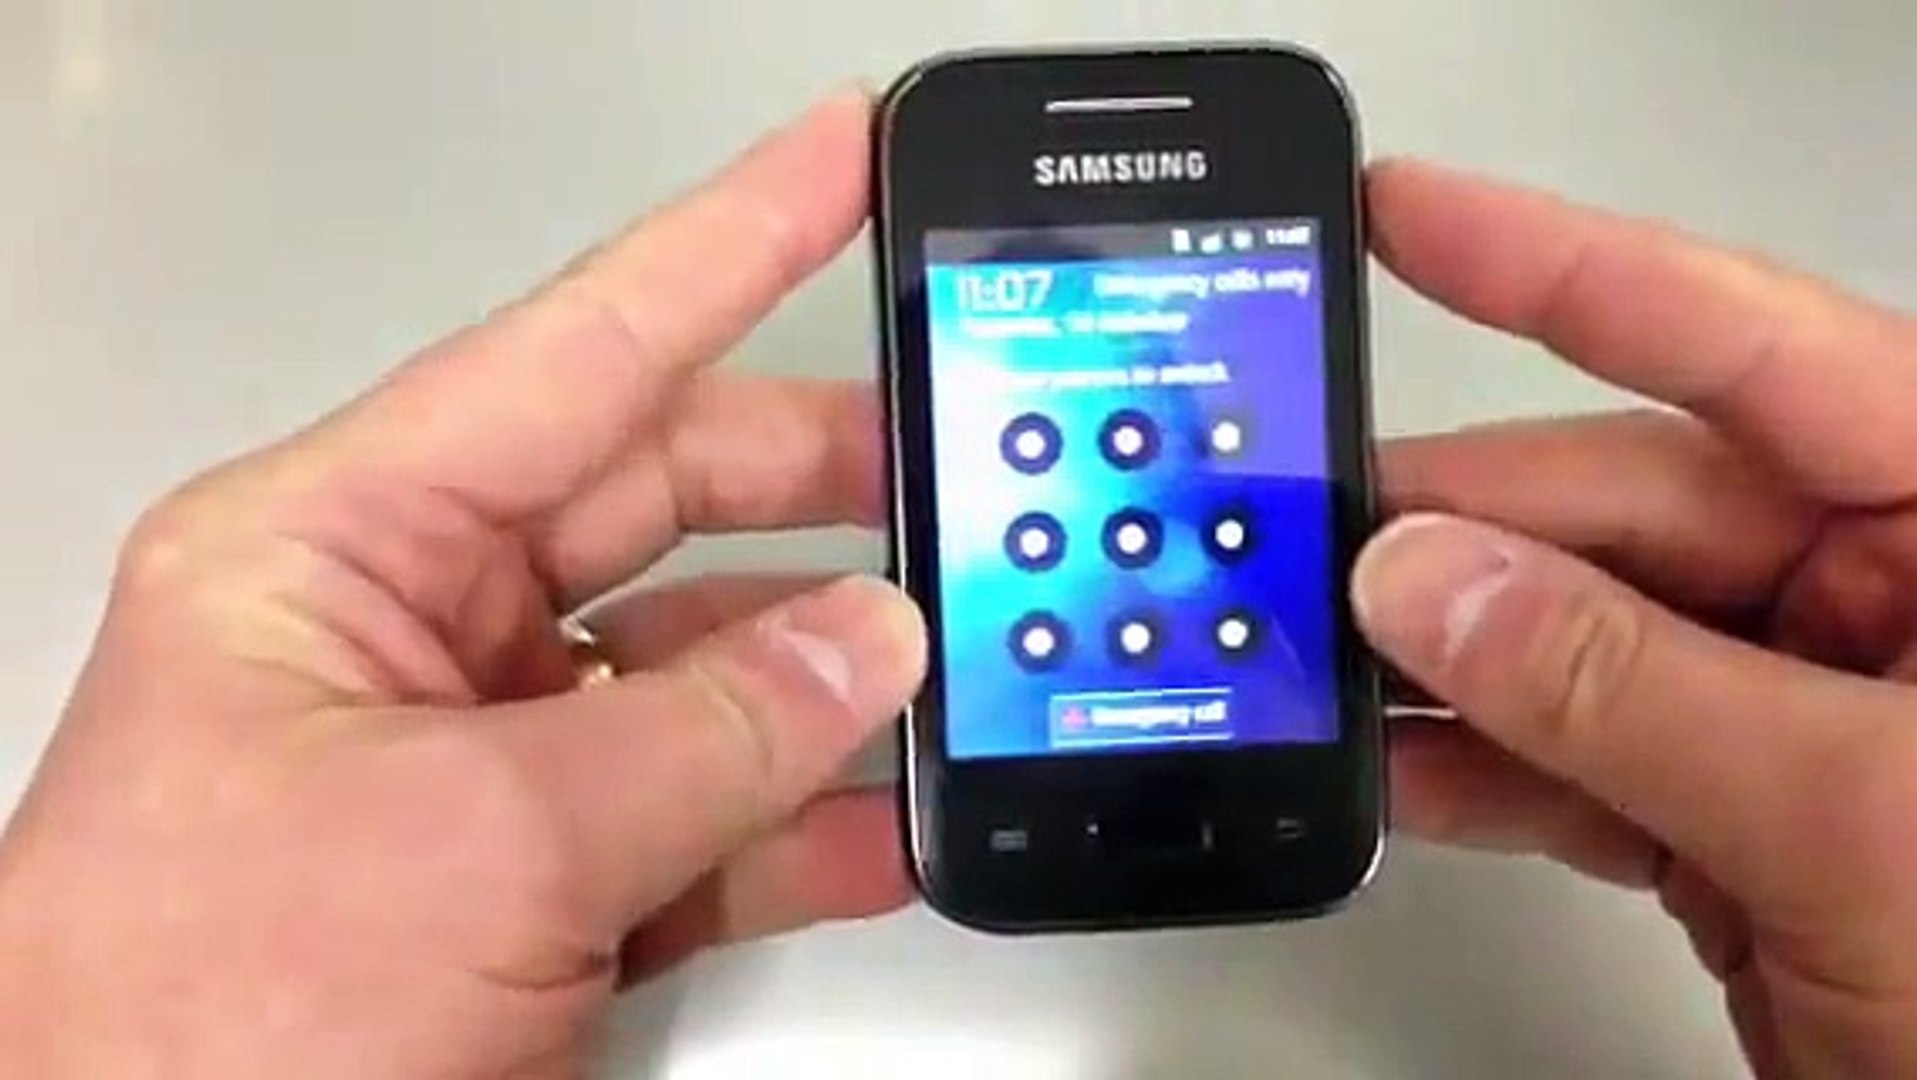 How To Remove Pattern Password Lock From Samsung Galaxy Y S5360 S5363 Video Dailymotion